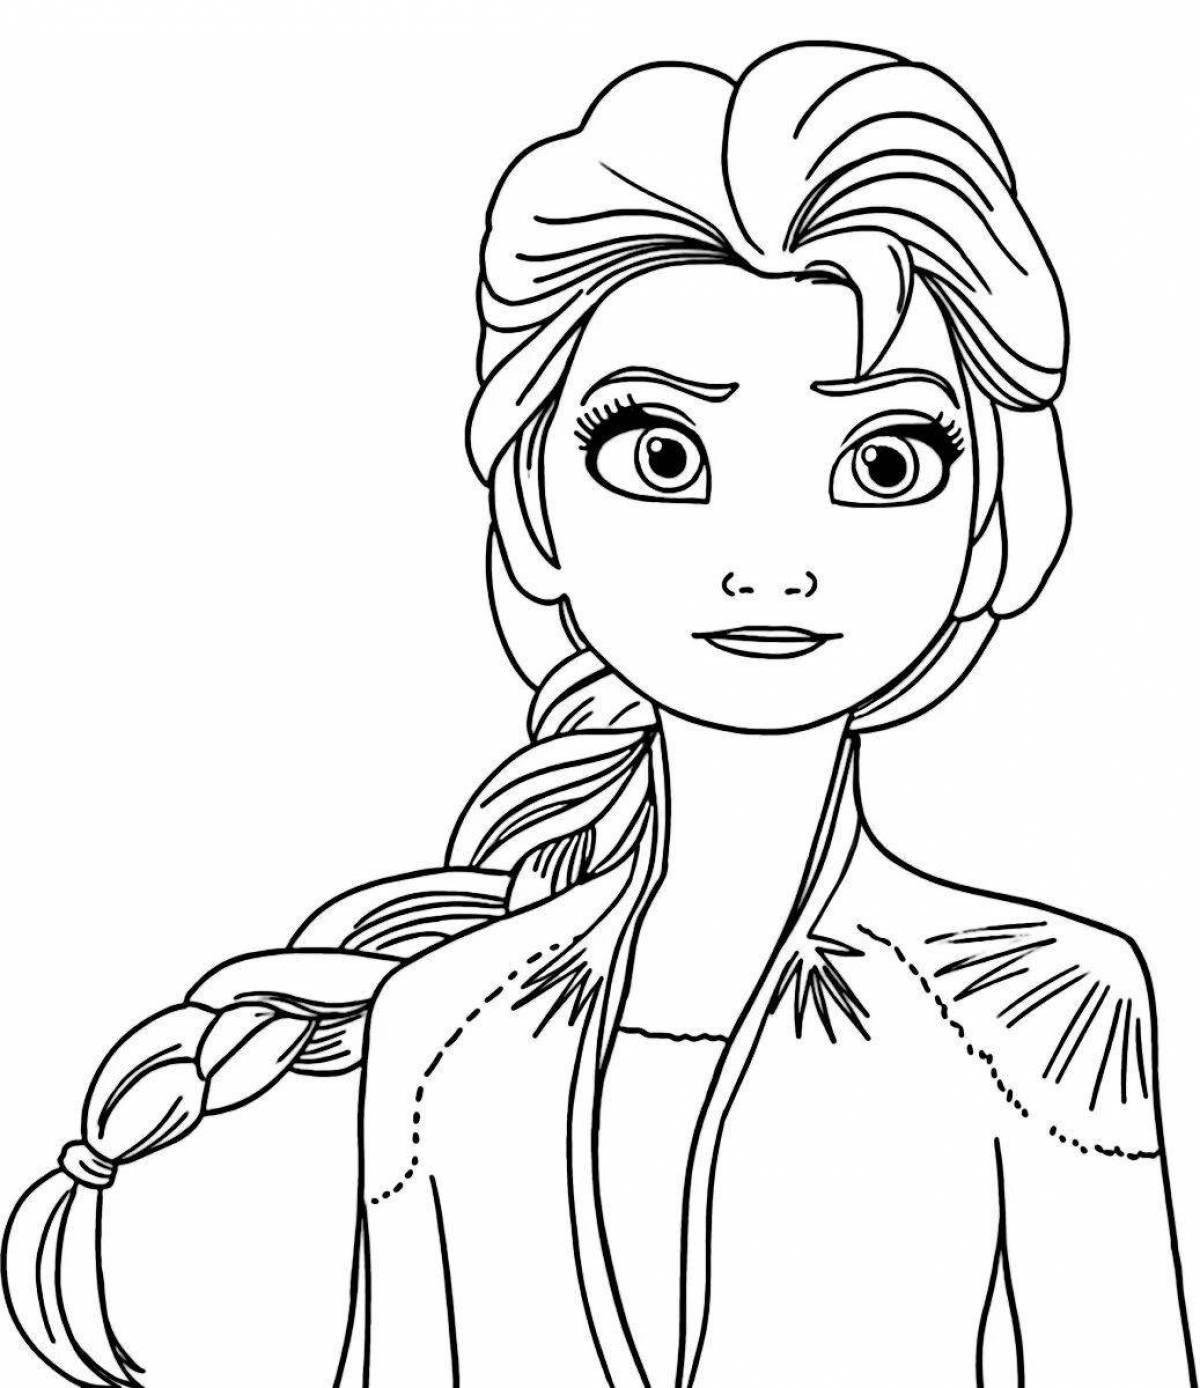 Elsa baby gorgeous coloring book